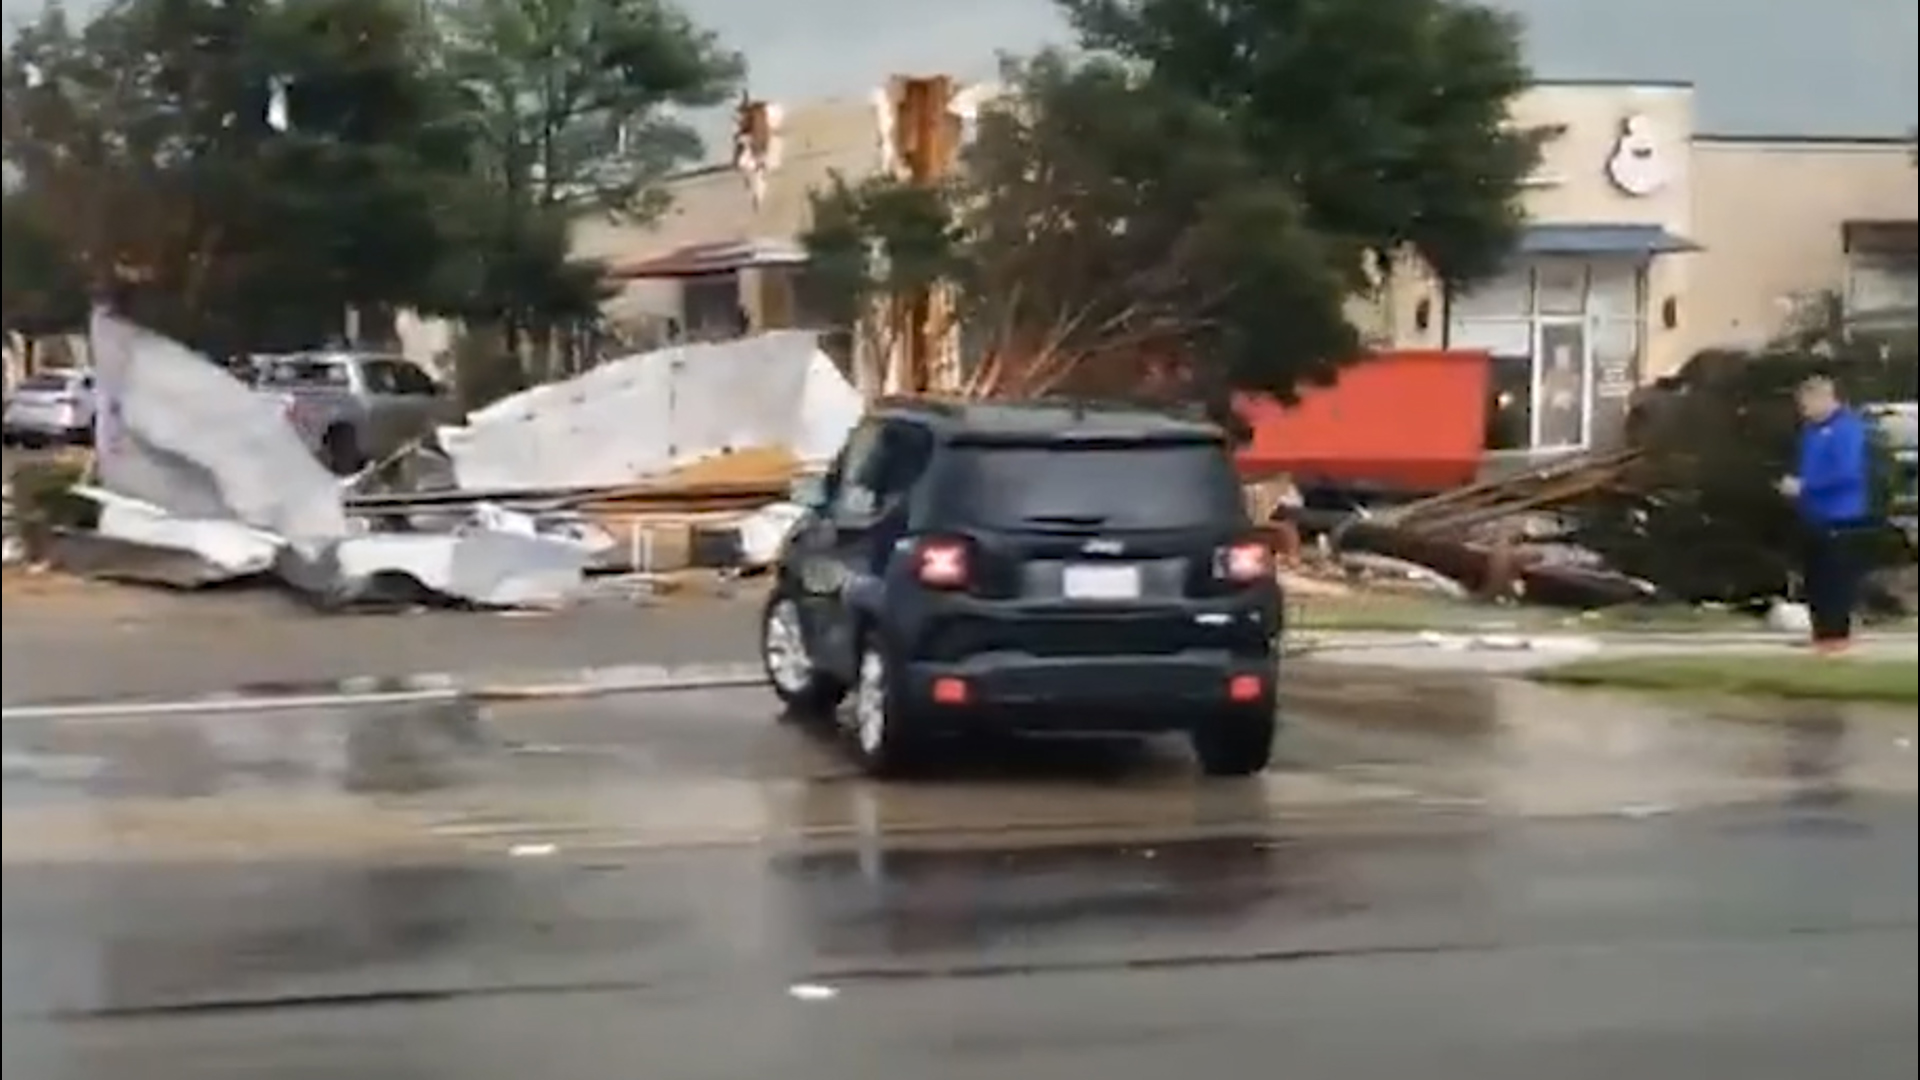 Video shows damage from storms that pushed through Belton and other parts of Central Texas Wednesday.